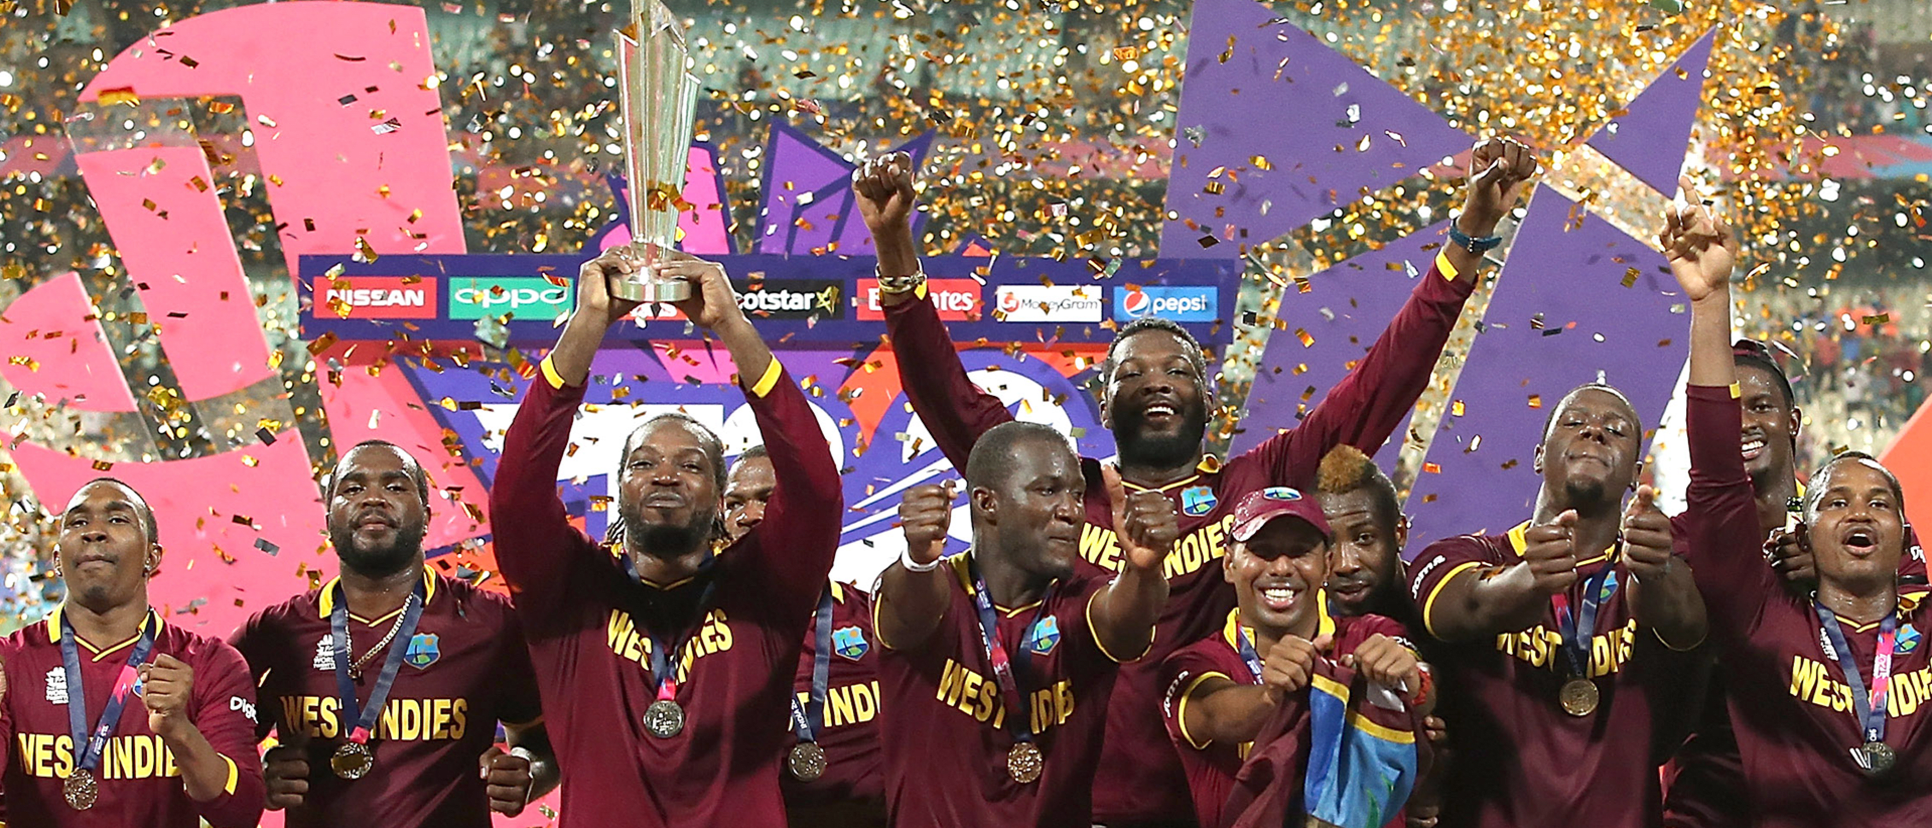 West Indies are the defending champions